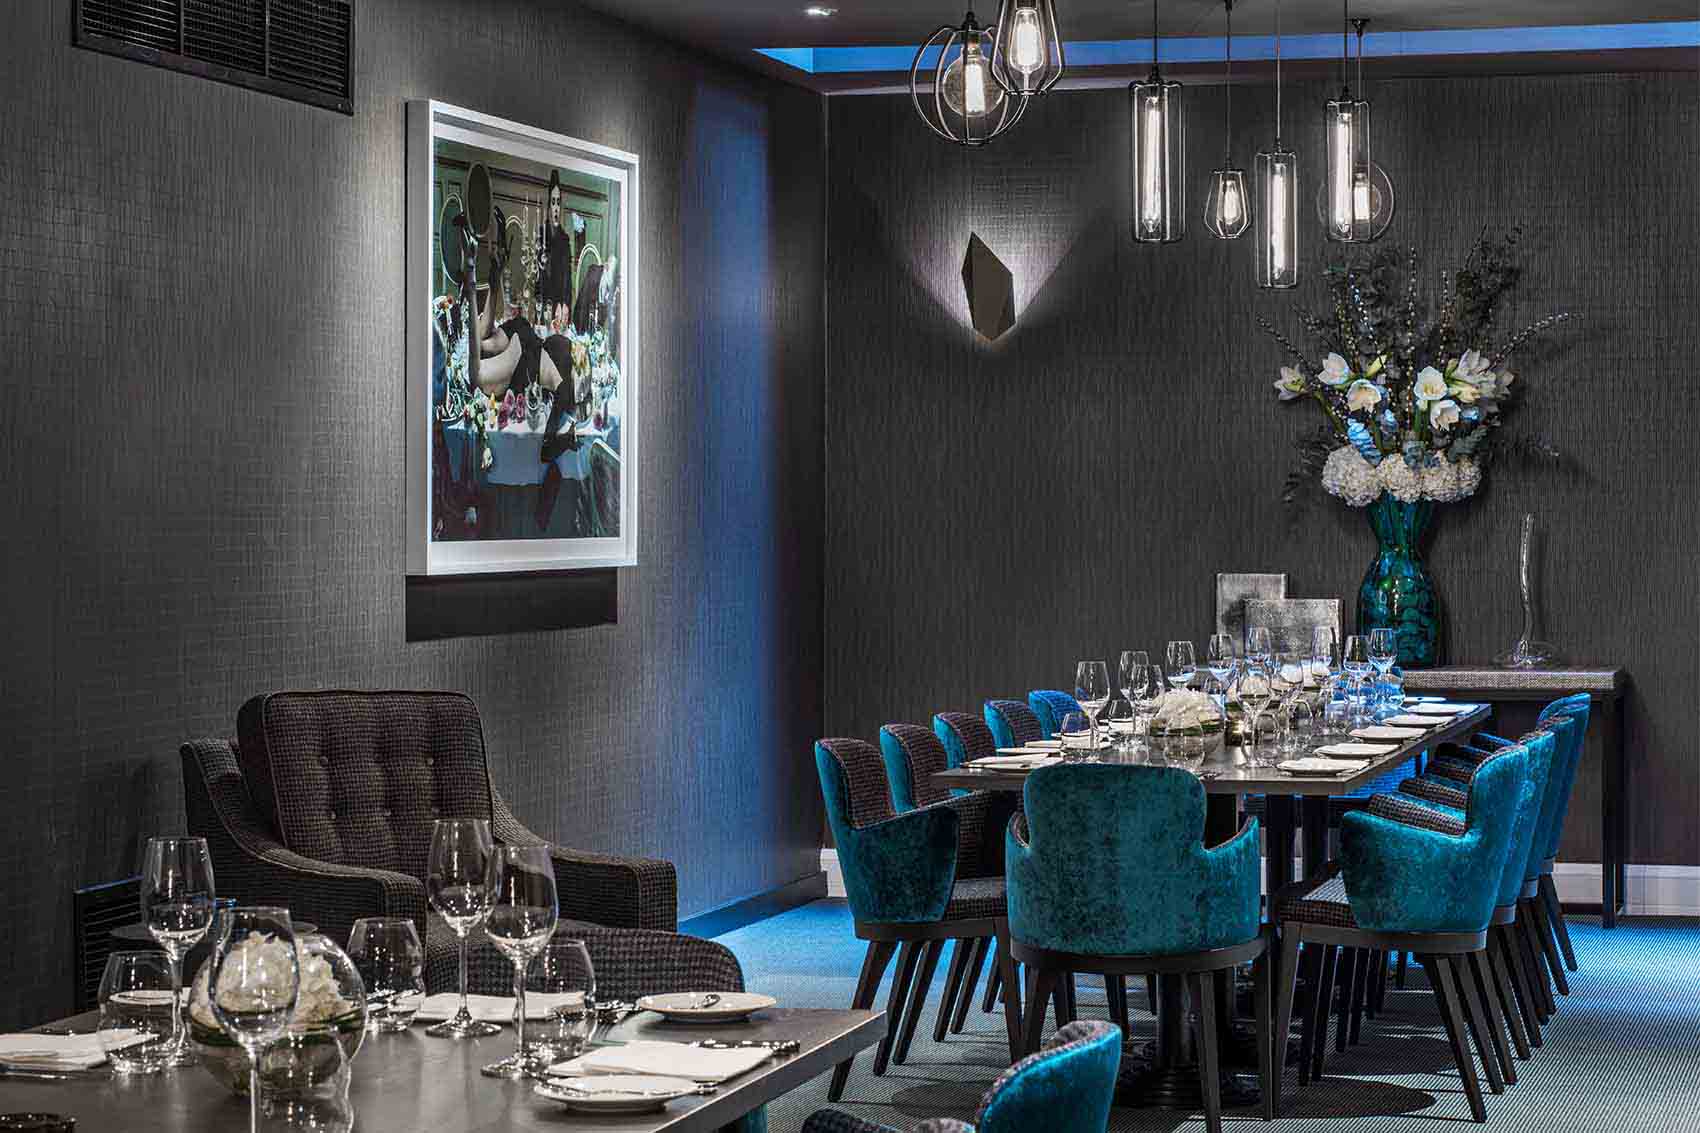 Private dining room, teal velvet chairs, photography artwork, top London design studio